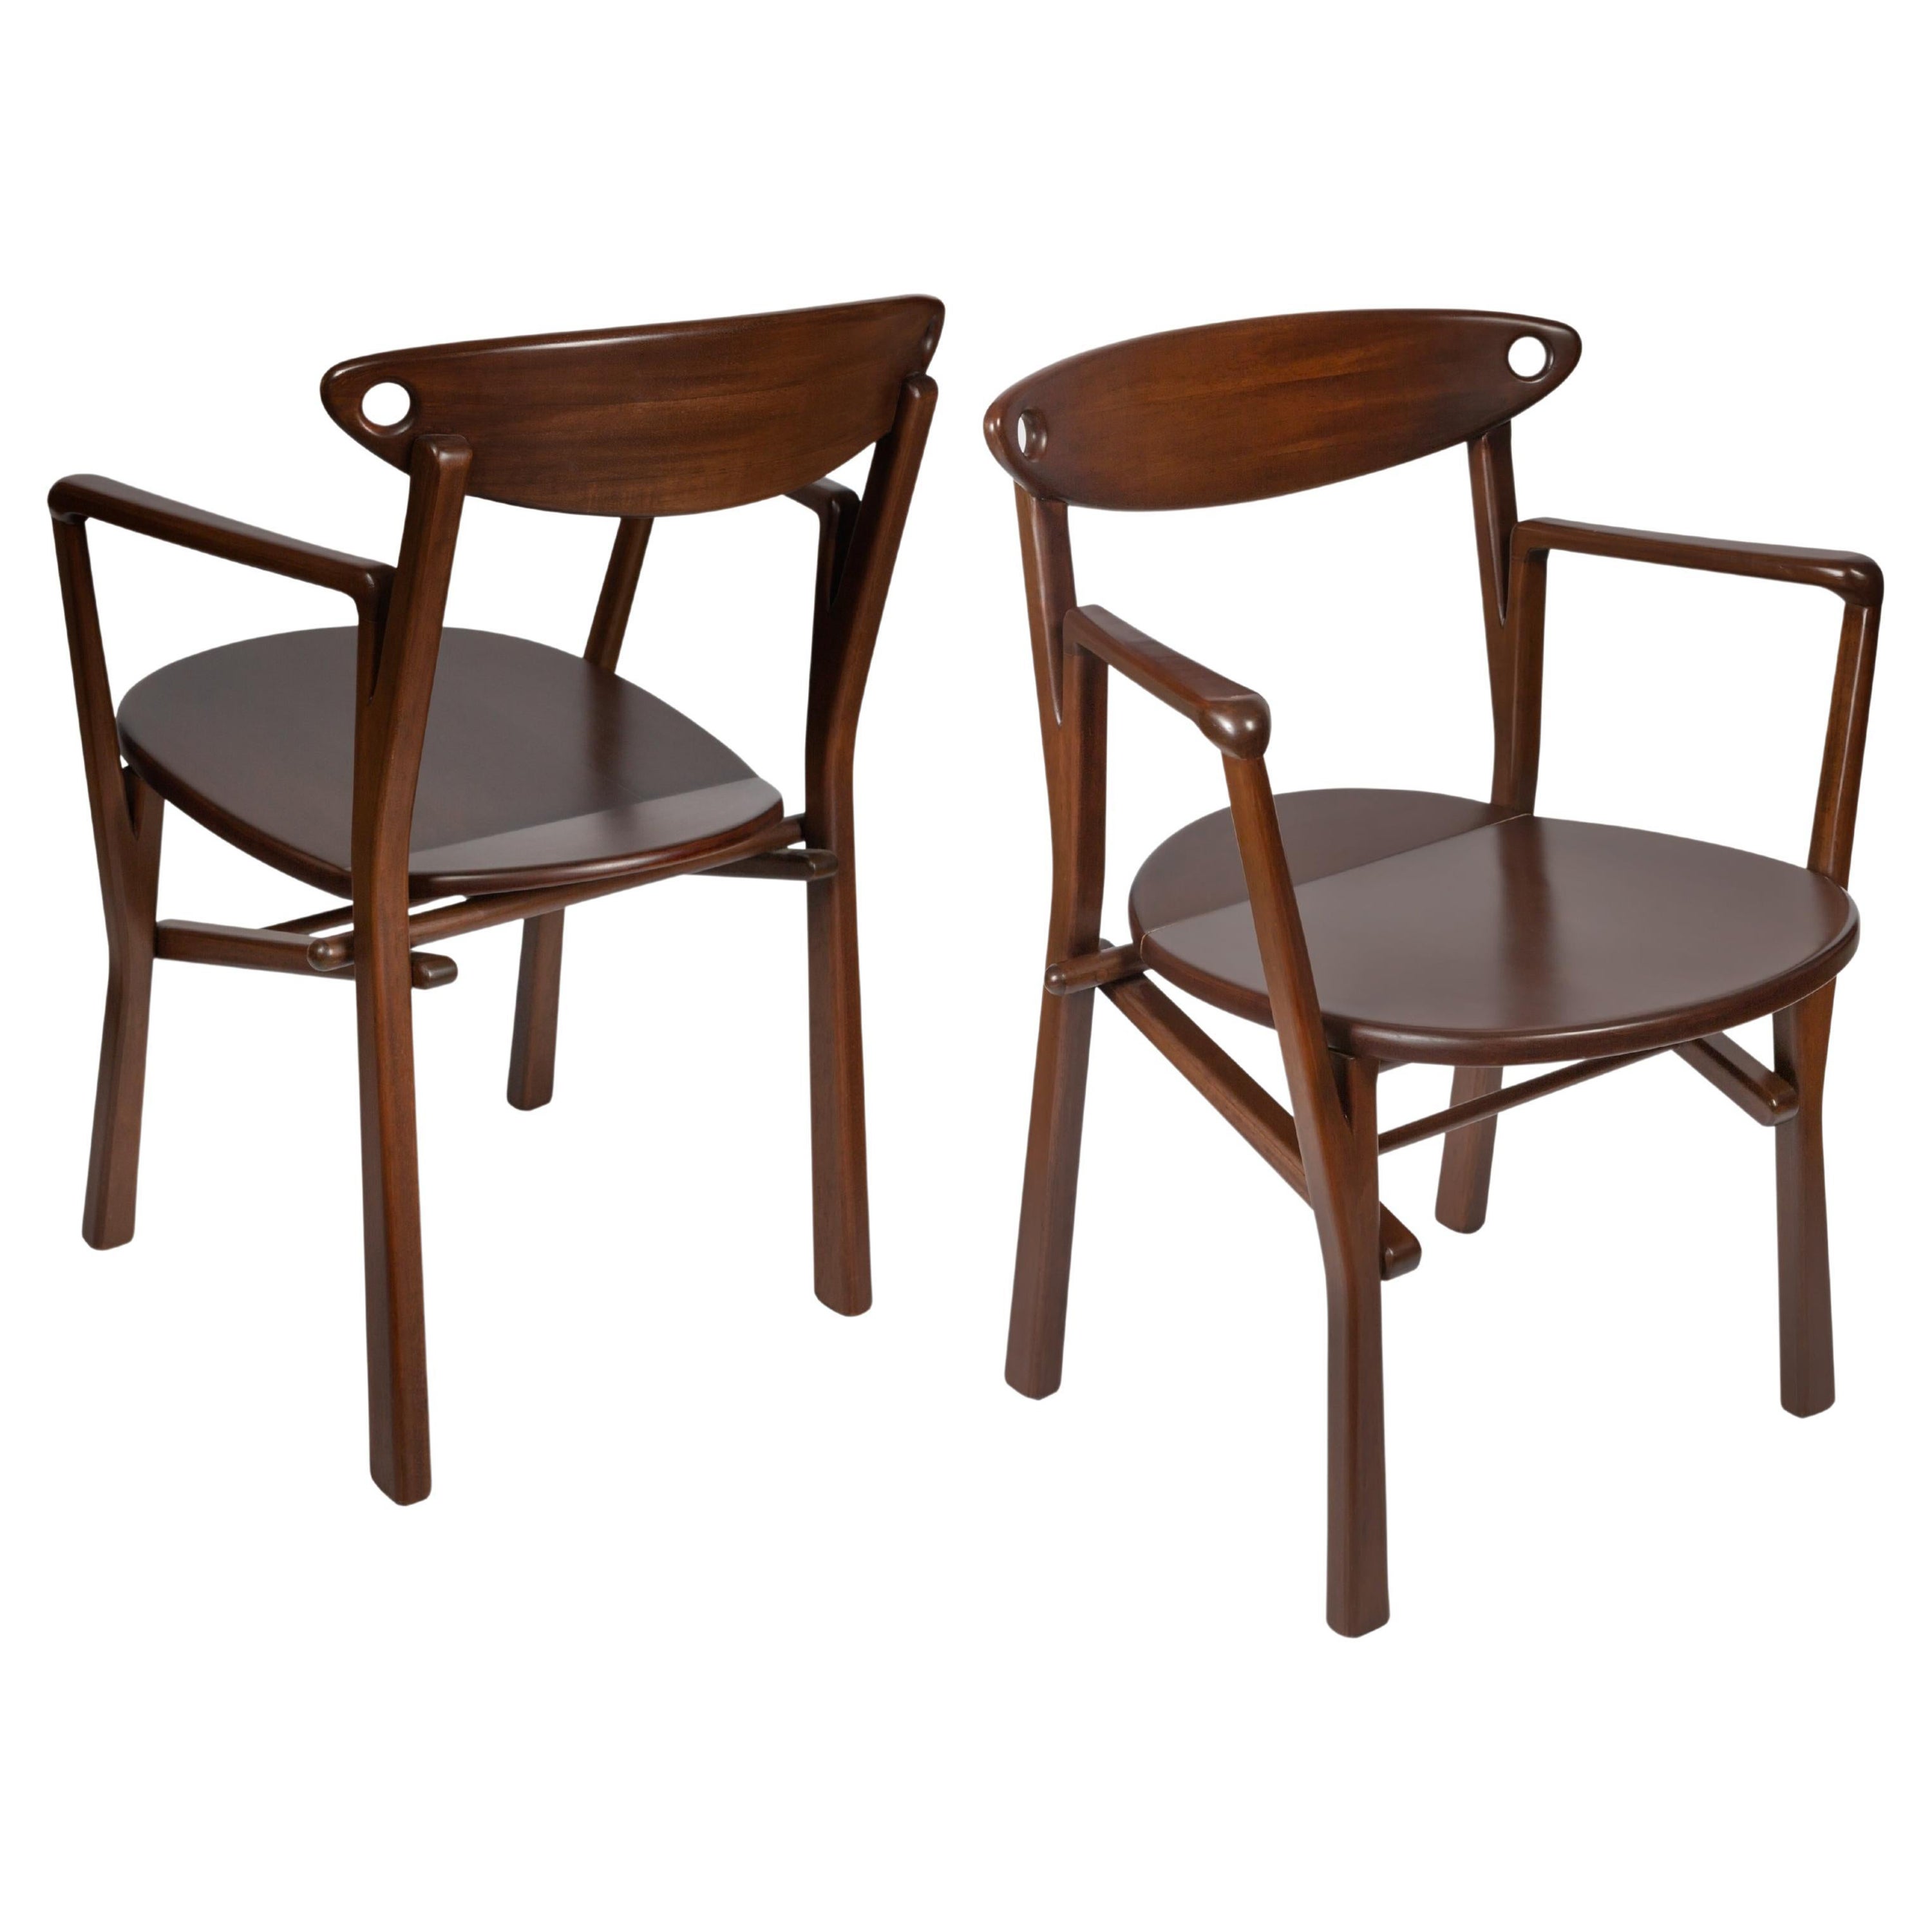 Set of 02 Armchairs Laje in Dark Brown Finish Wood - Ready for Delivery For Sale